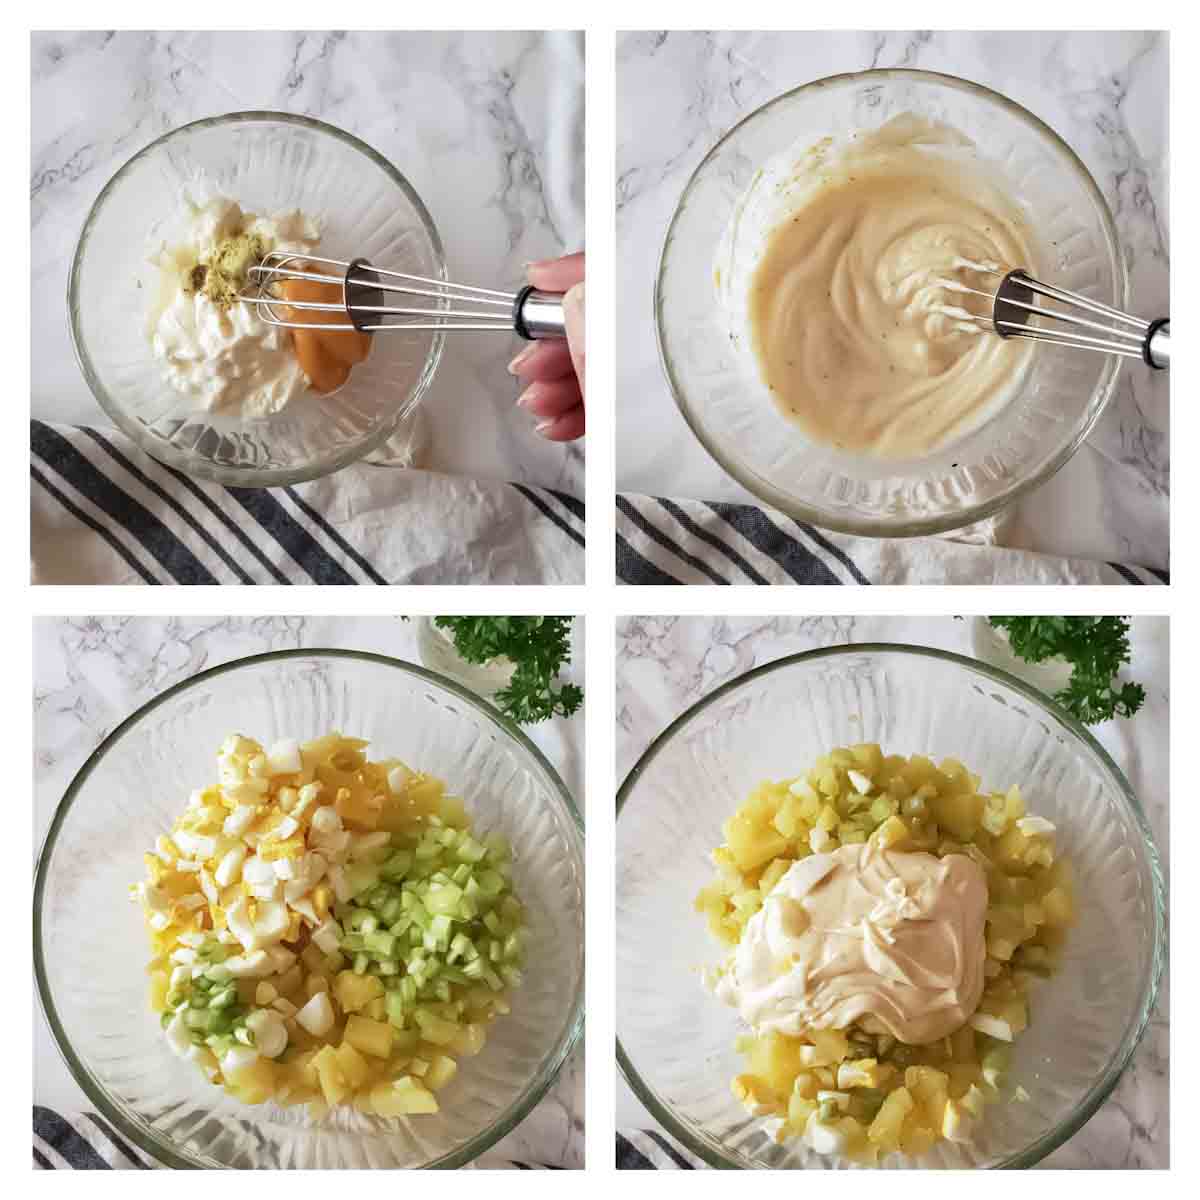 Step by step photo collage showing how to make potato salad at home.